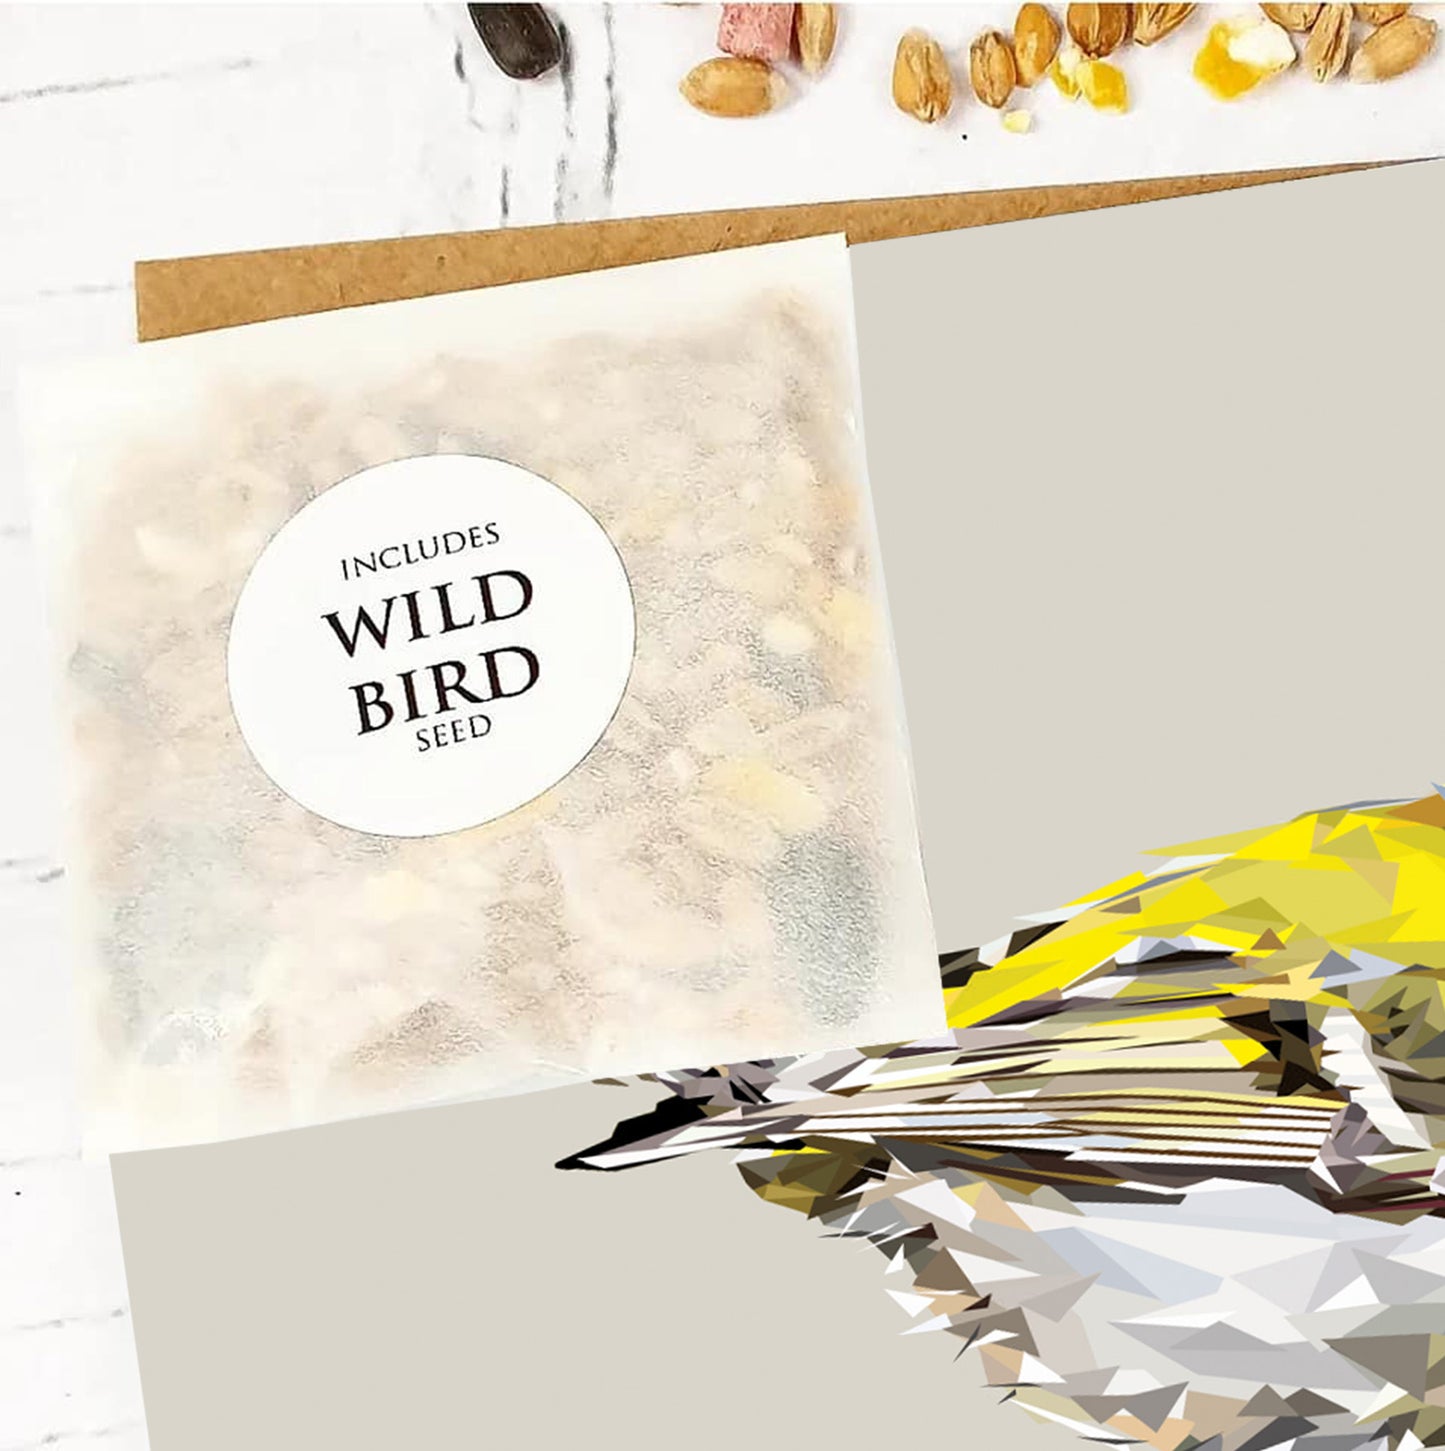 GOLDCREST seed greeting card